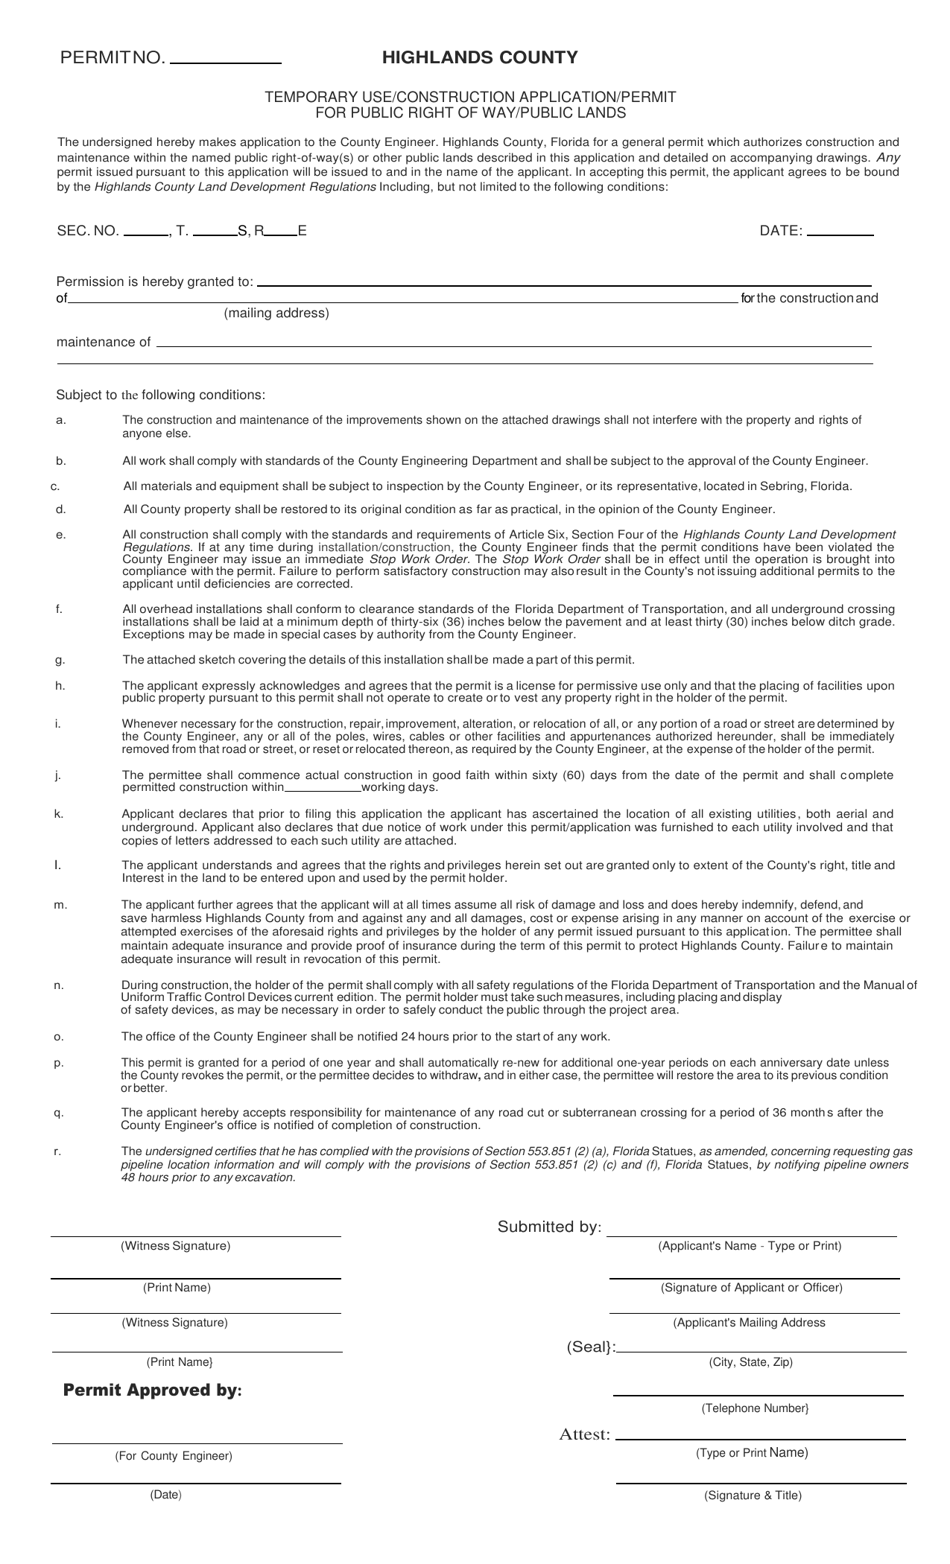 Temporary Use / Construction Application / Permit for Public Right of Way / Public Lands - Highlands County, Florida, Page 1